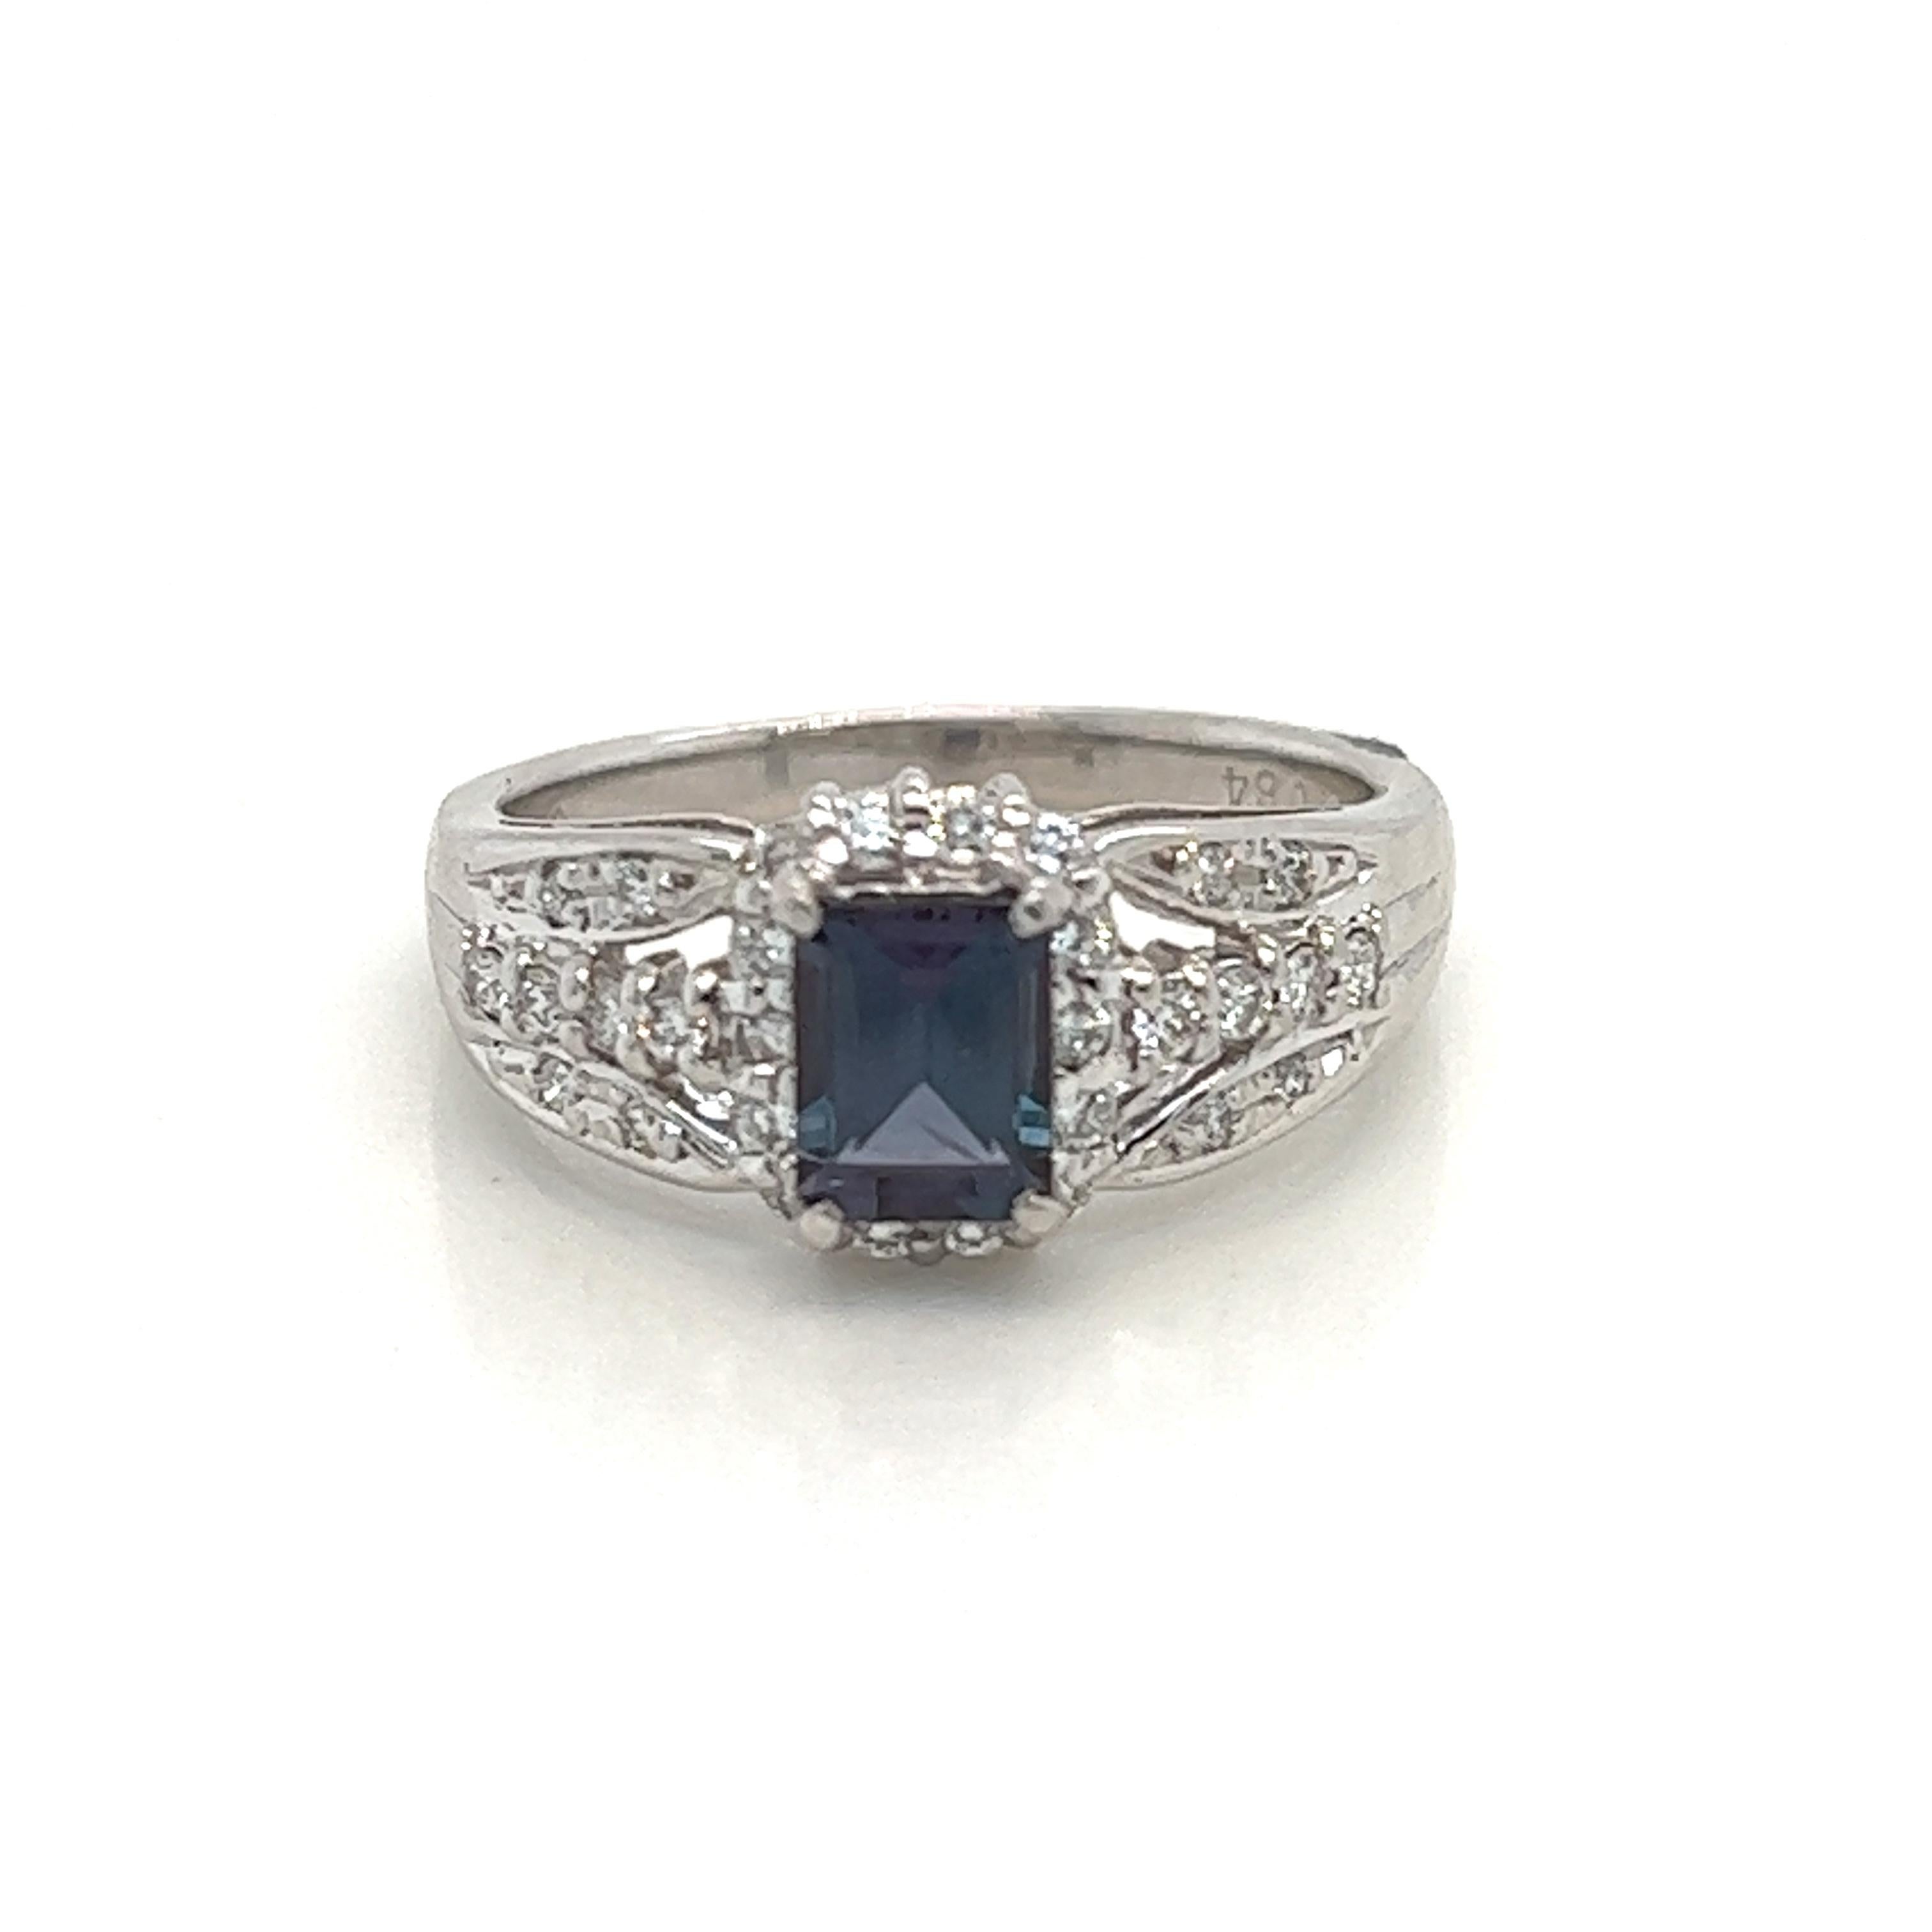 This is a gorgeous natural AAA quality emerald cut Alexandrite surrounded by dainty diamonds that is set in a vintage platinum setting. This ring features a natural 0.84 carat emerald cut alexandrite that is certified by the Gemological Institute of